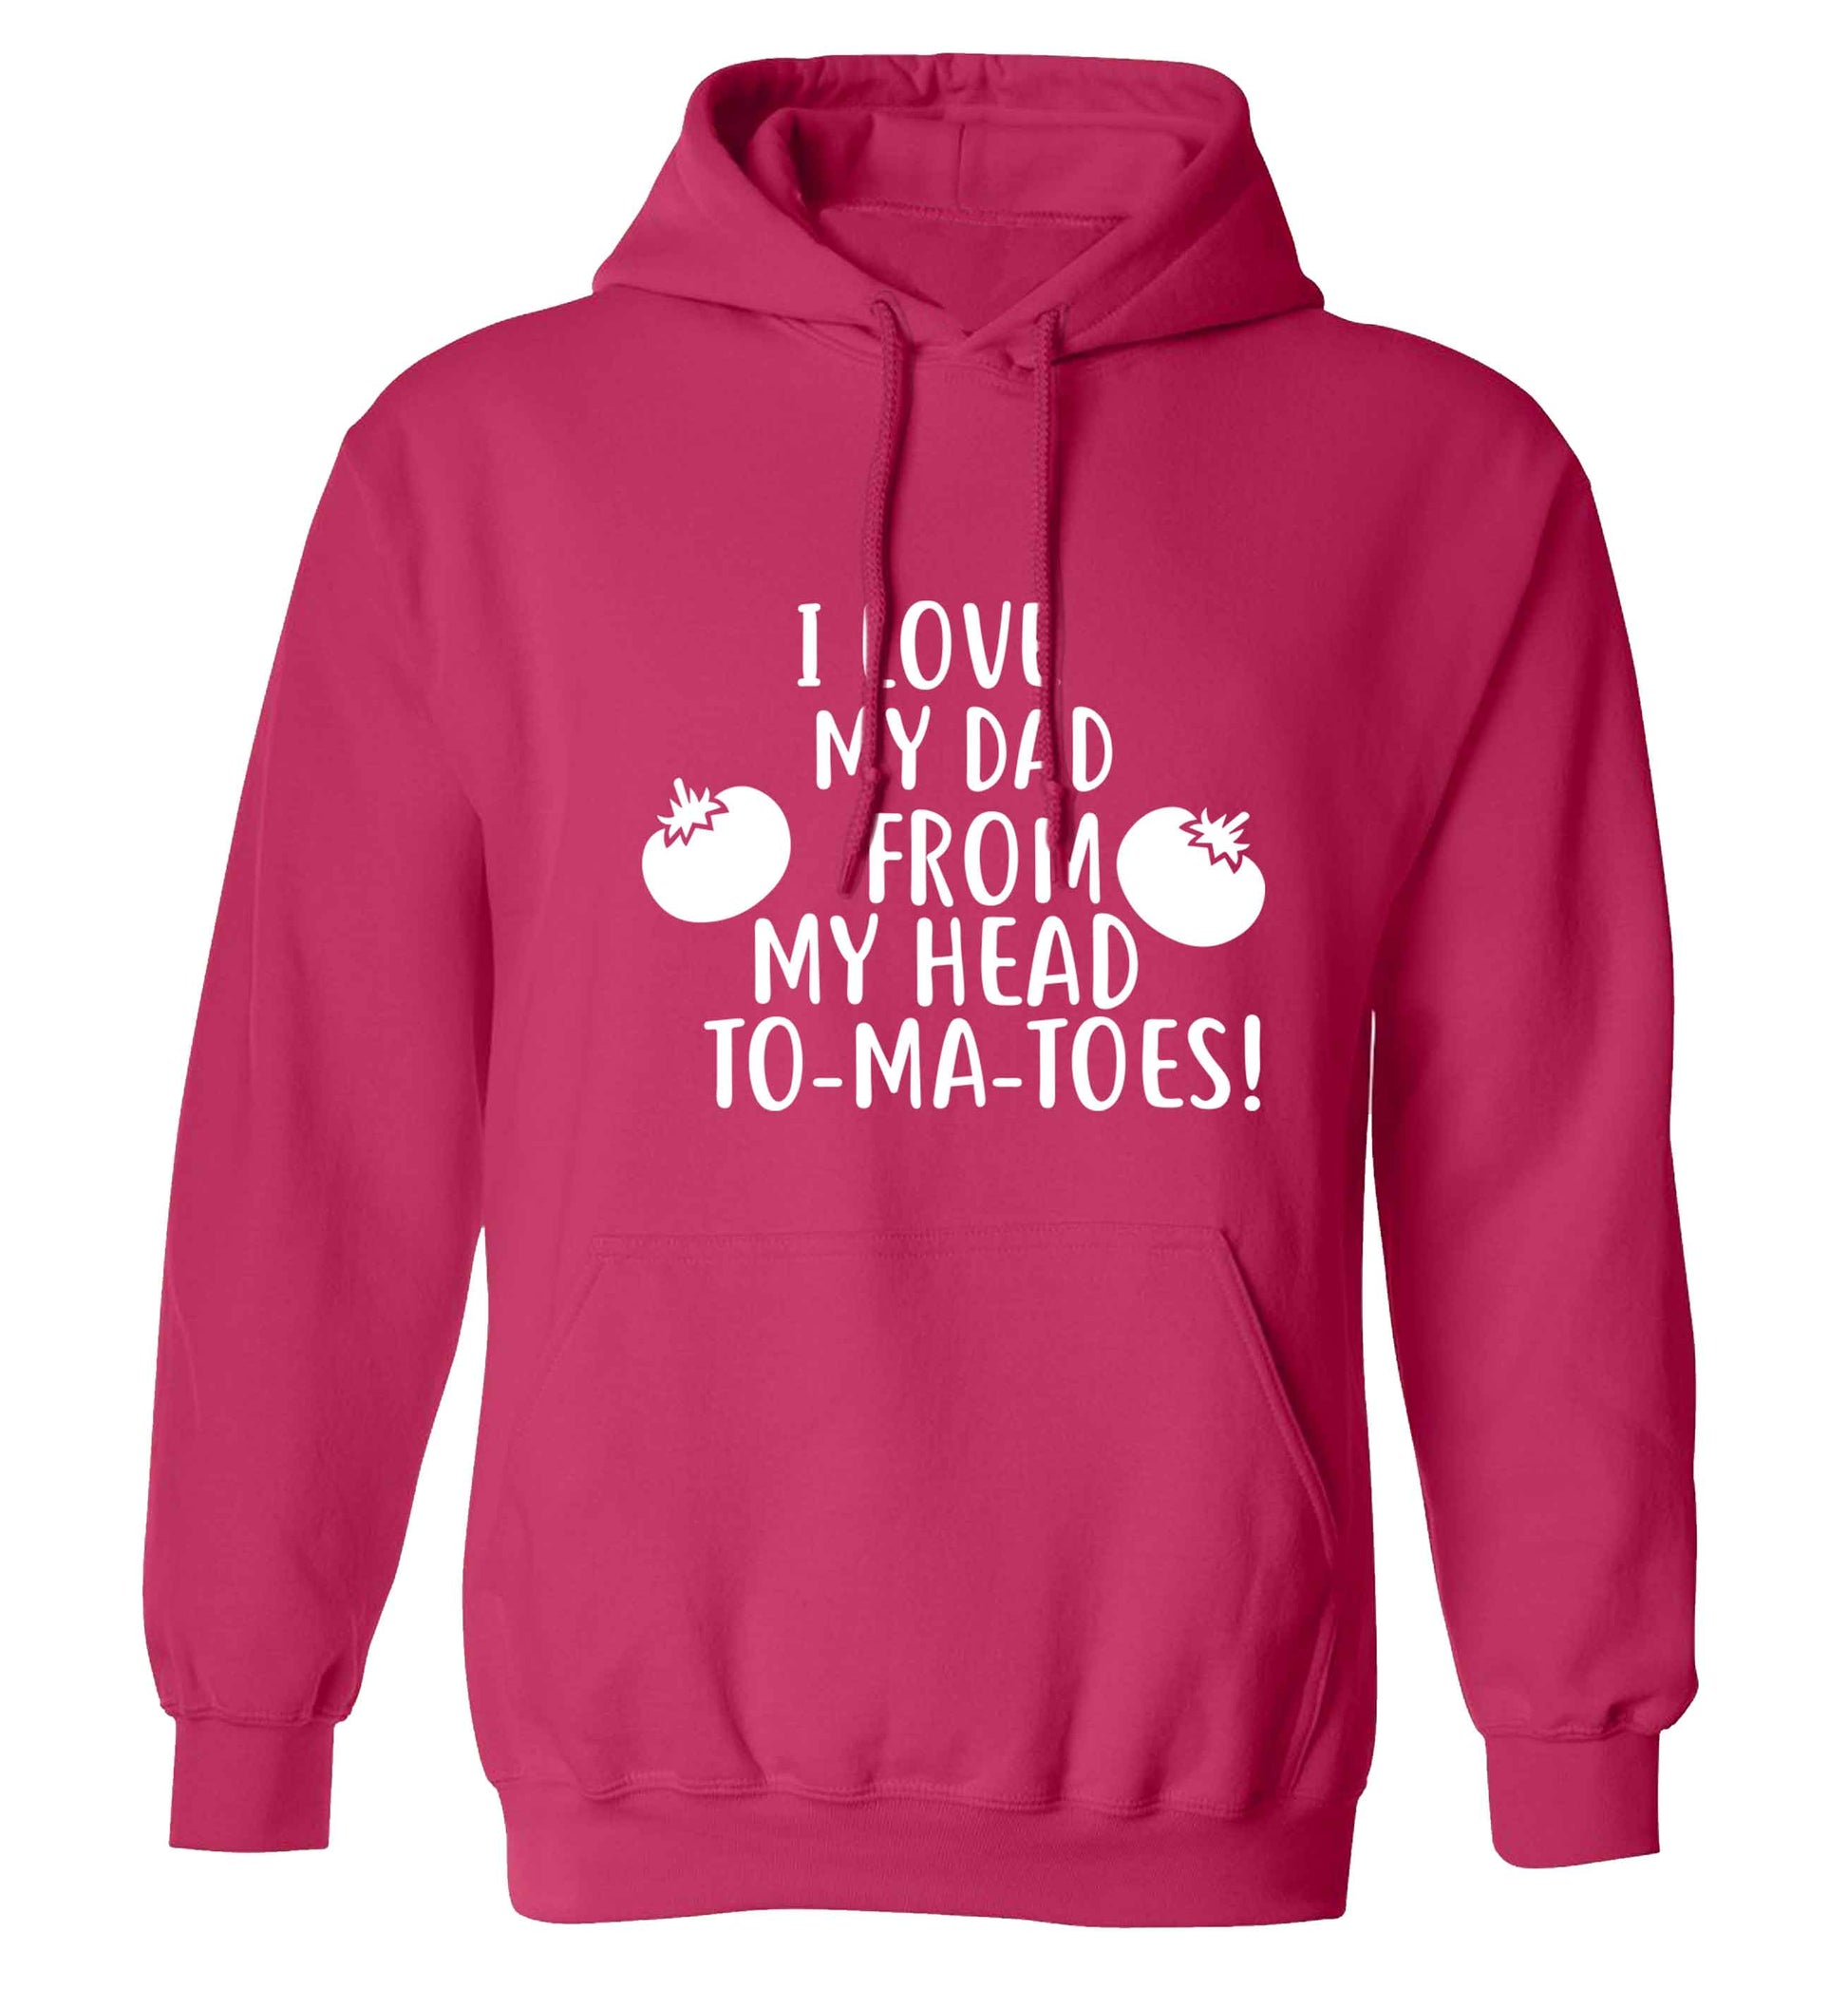 I love my dad from my head to-ma-toes adults unisex pink hoodie 2XL